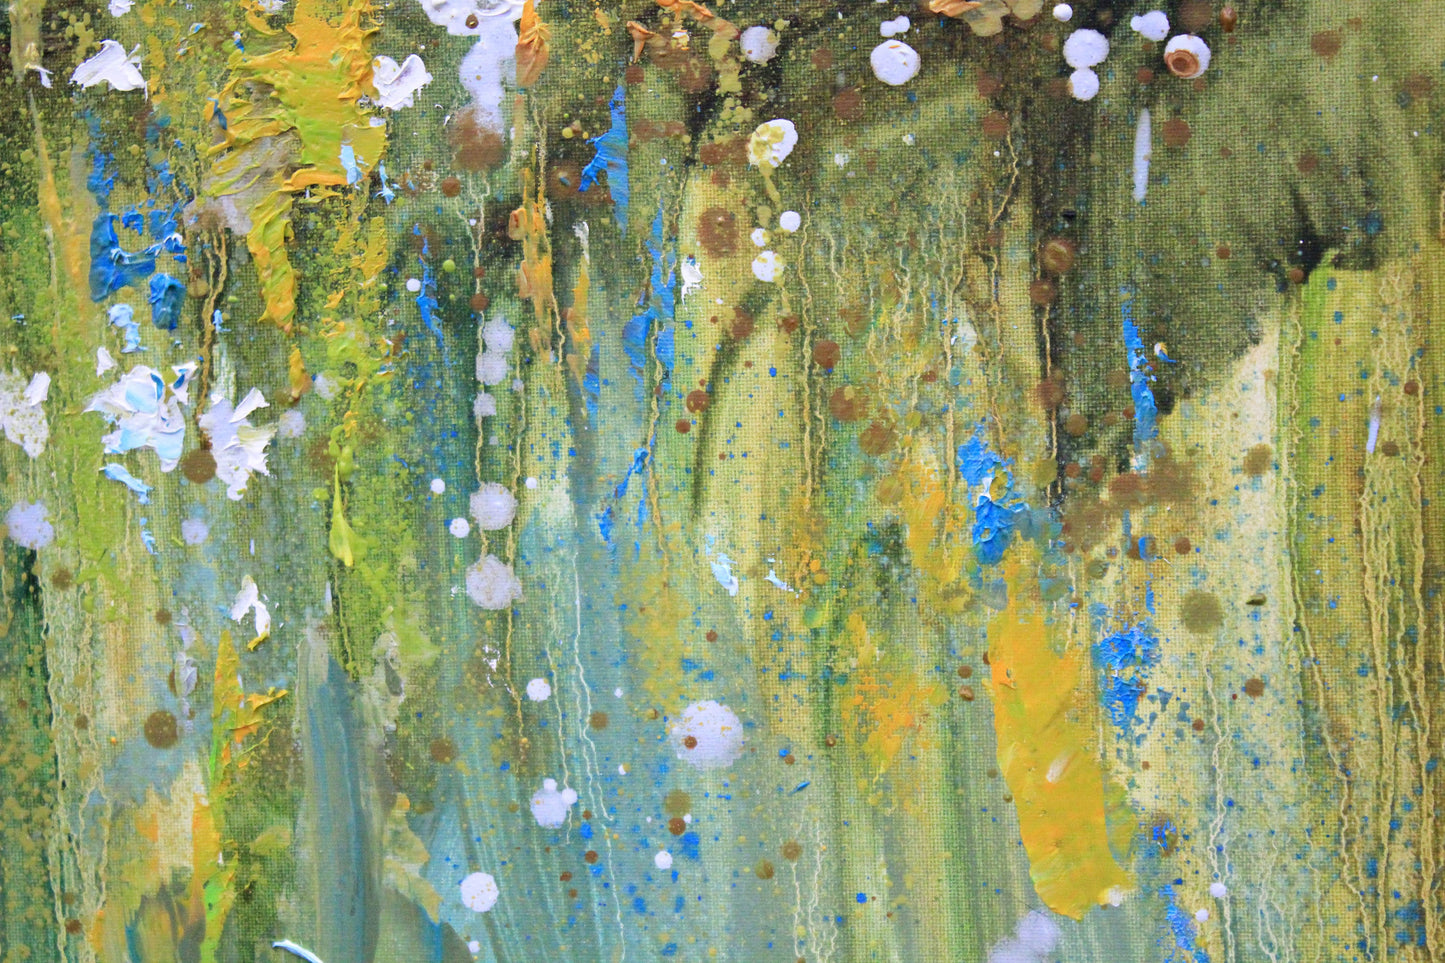 Field of flowers oil painting, countryside painting, meadow painting, summer artwork, canvas art natural landscape,field of flowers wall art